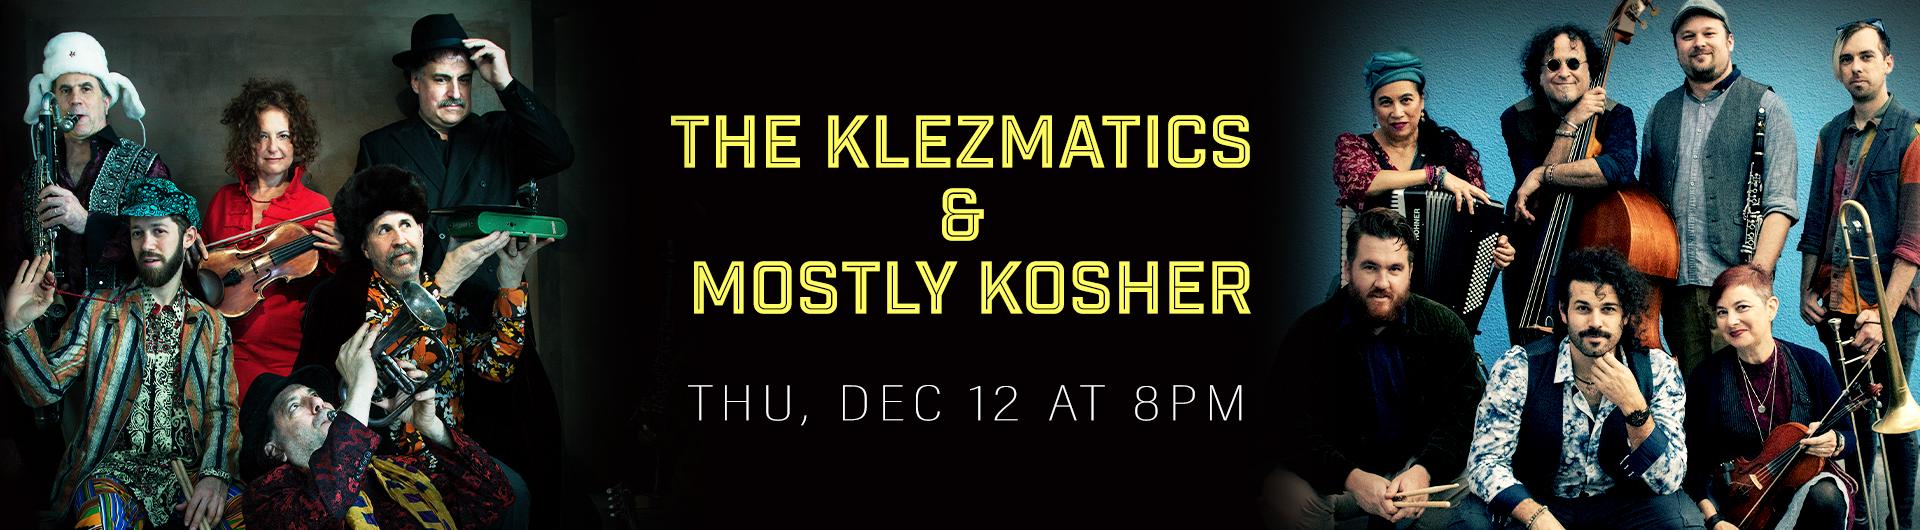 Members of The Klezmatics and Mostly Kosher posing with their instruments on either side of a headline with their names.